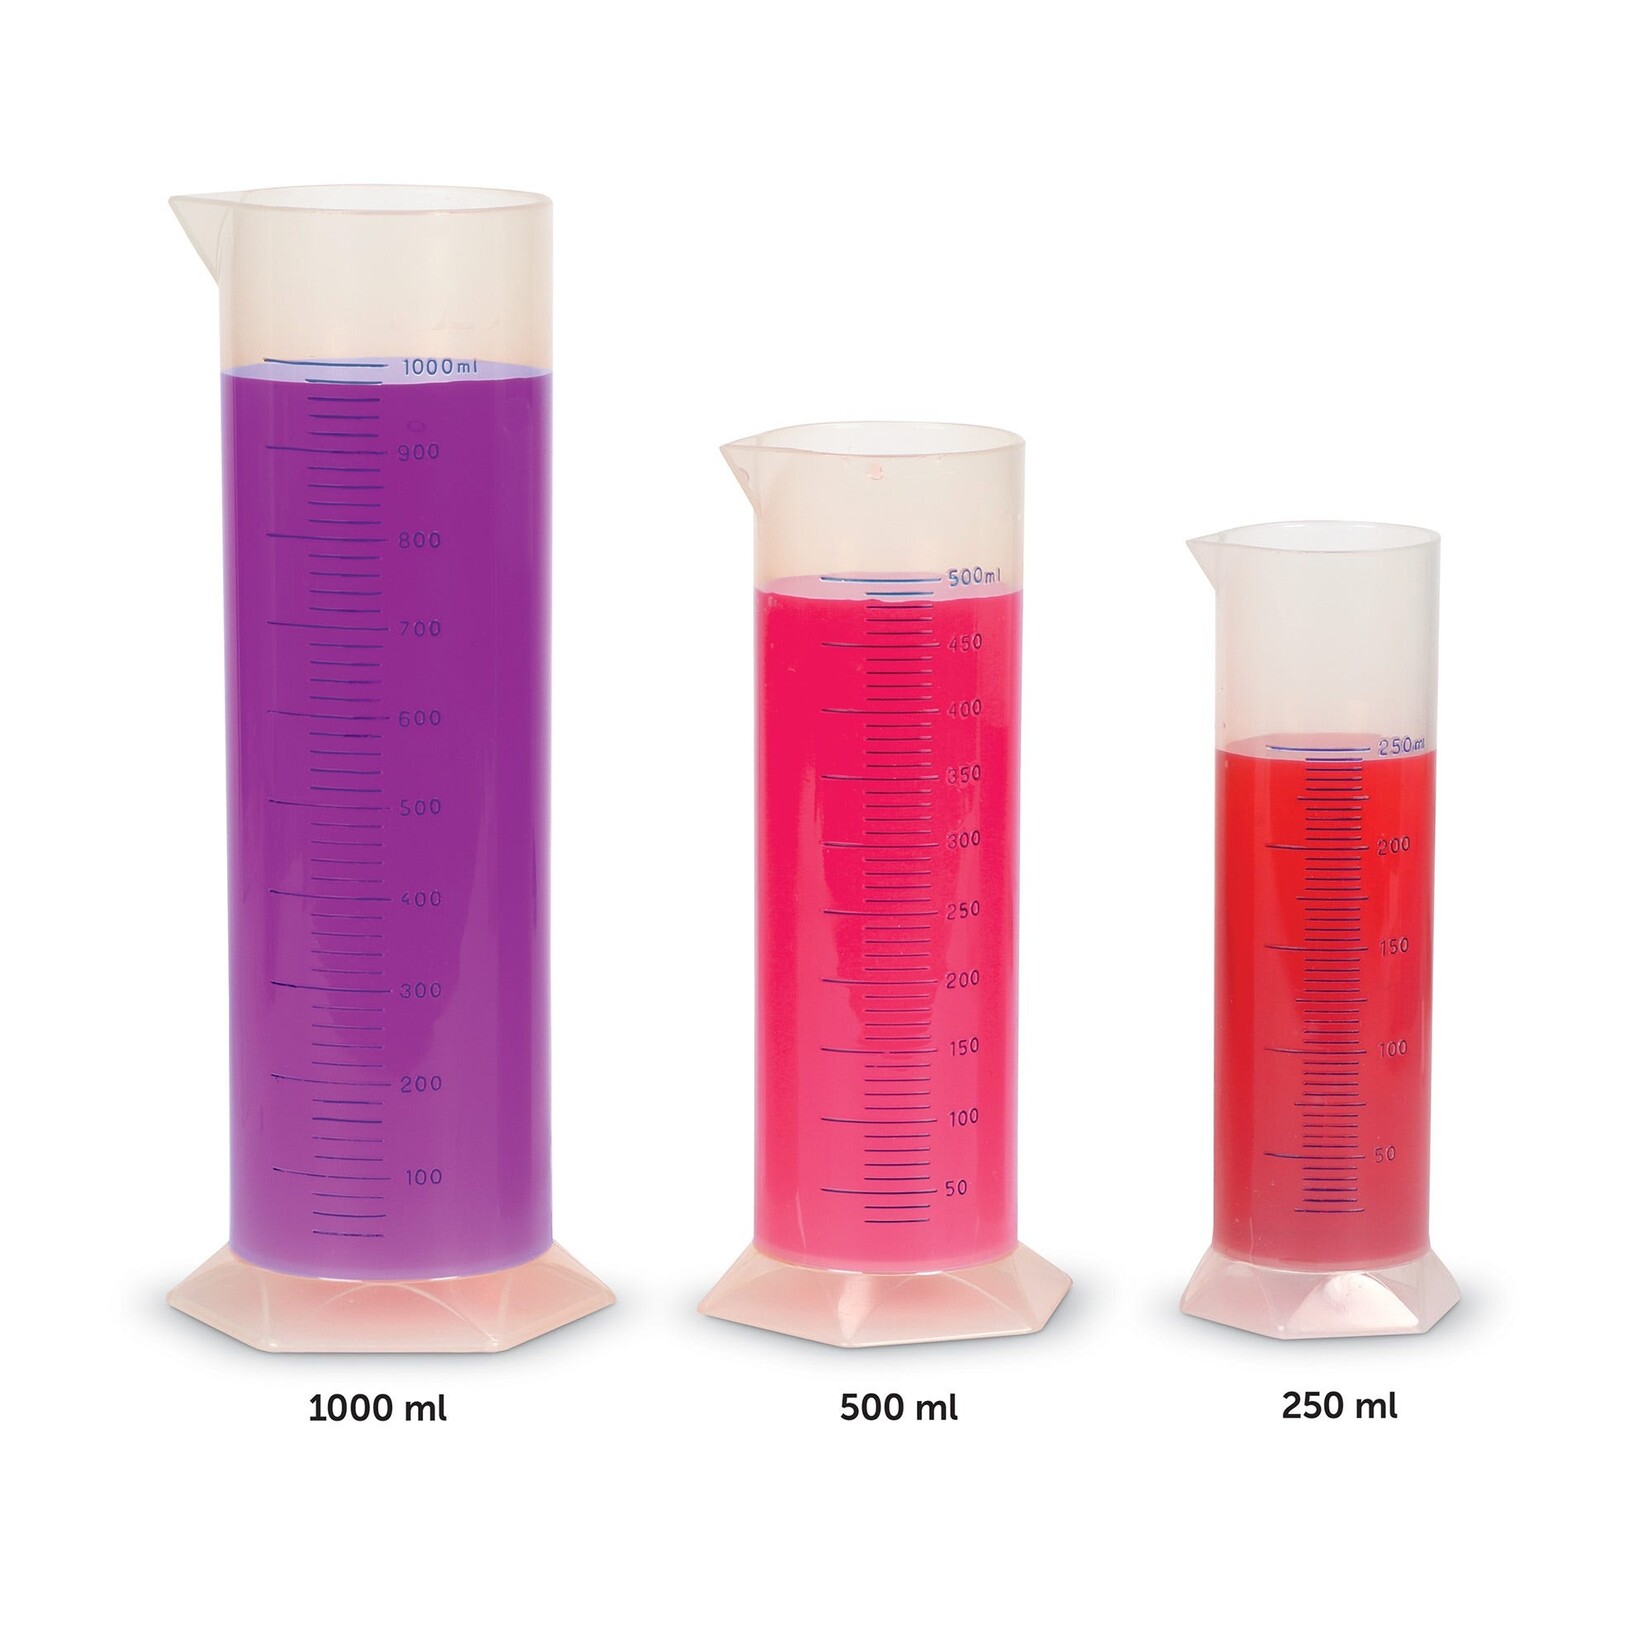 LEARNING RESOURCES INC Graduated Cylinders